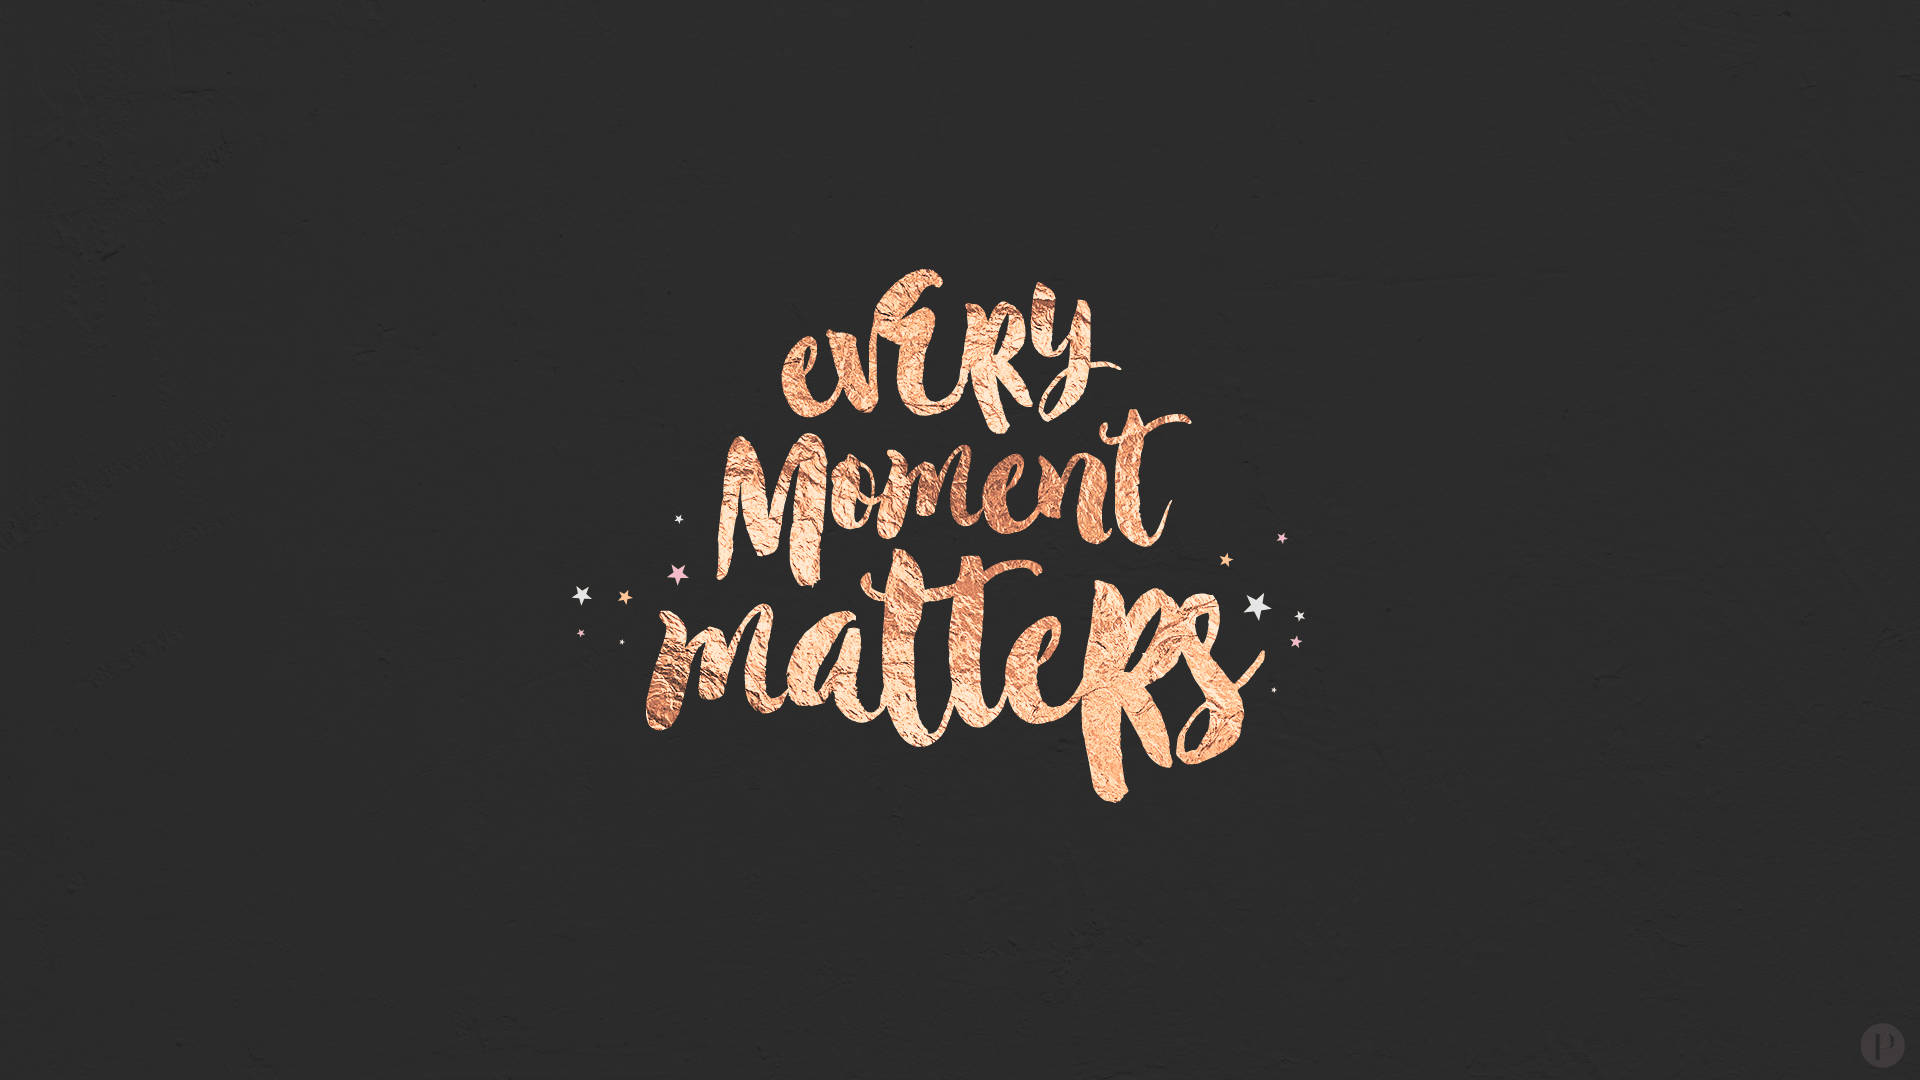 Every Moment Matters Laptop Background